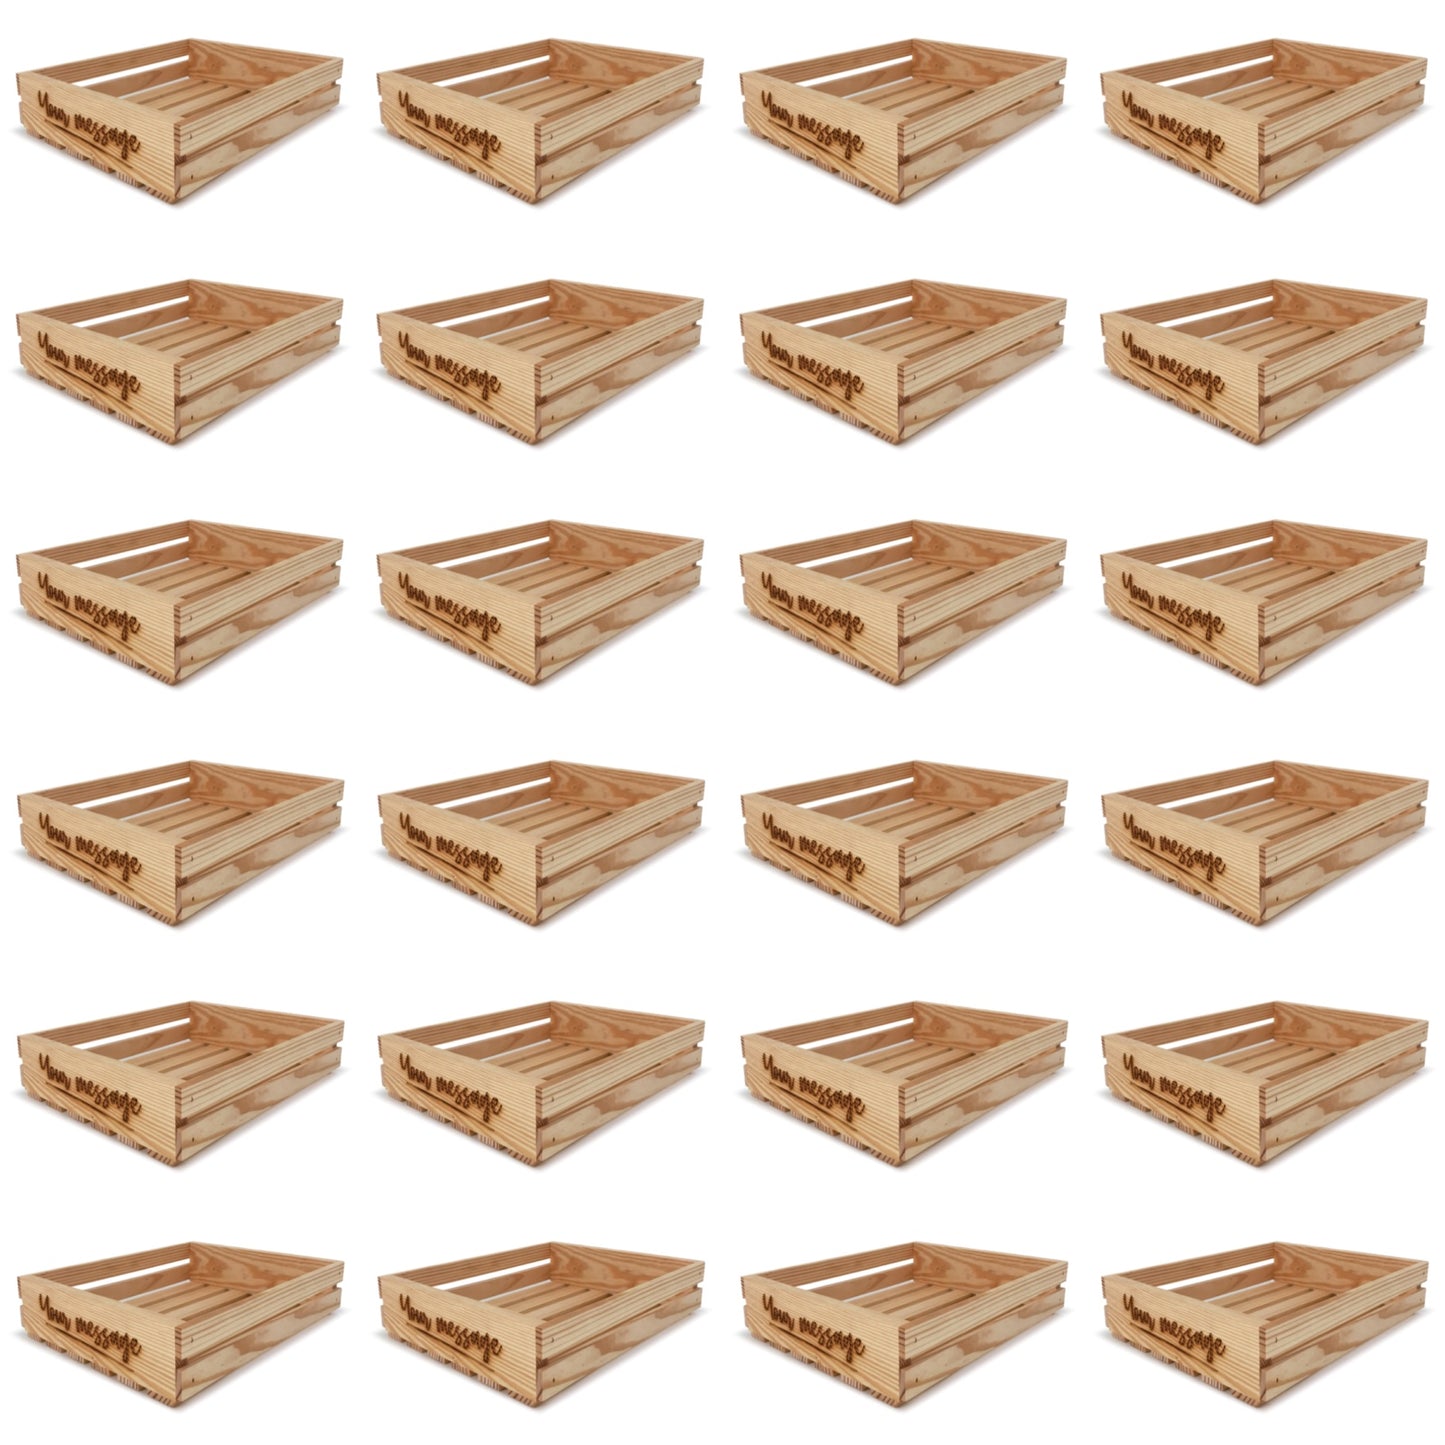 24 Customizable small wooden crates 14x12x3.5